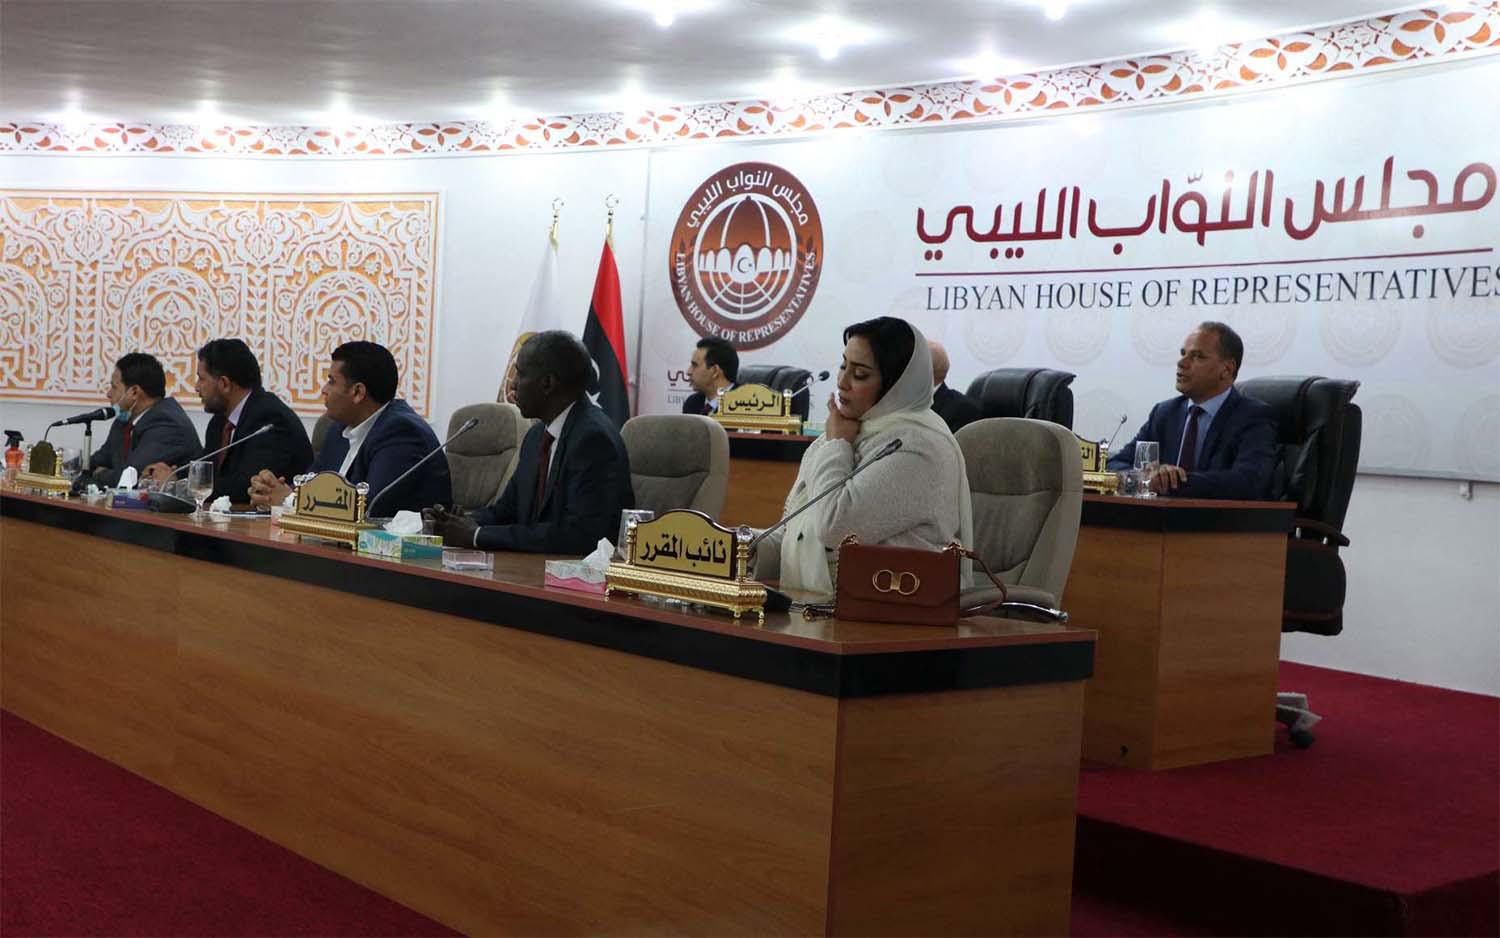 The vote took place in the parliament’s headquarters in the eastern city of Tobruk